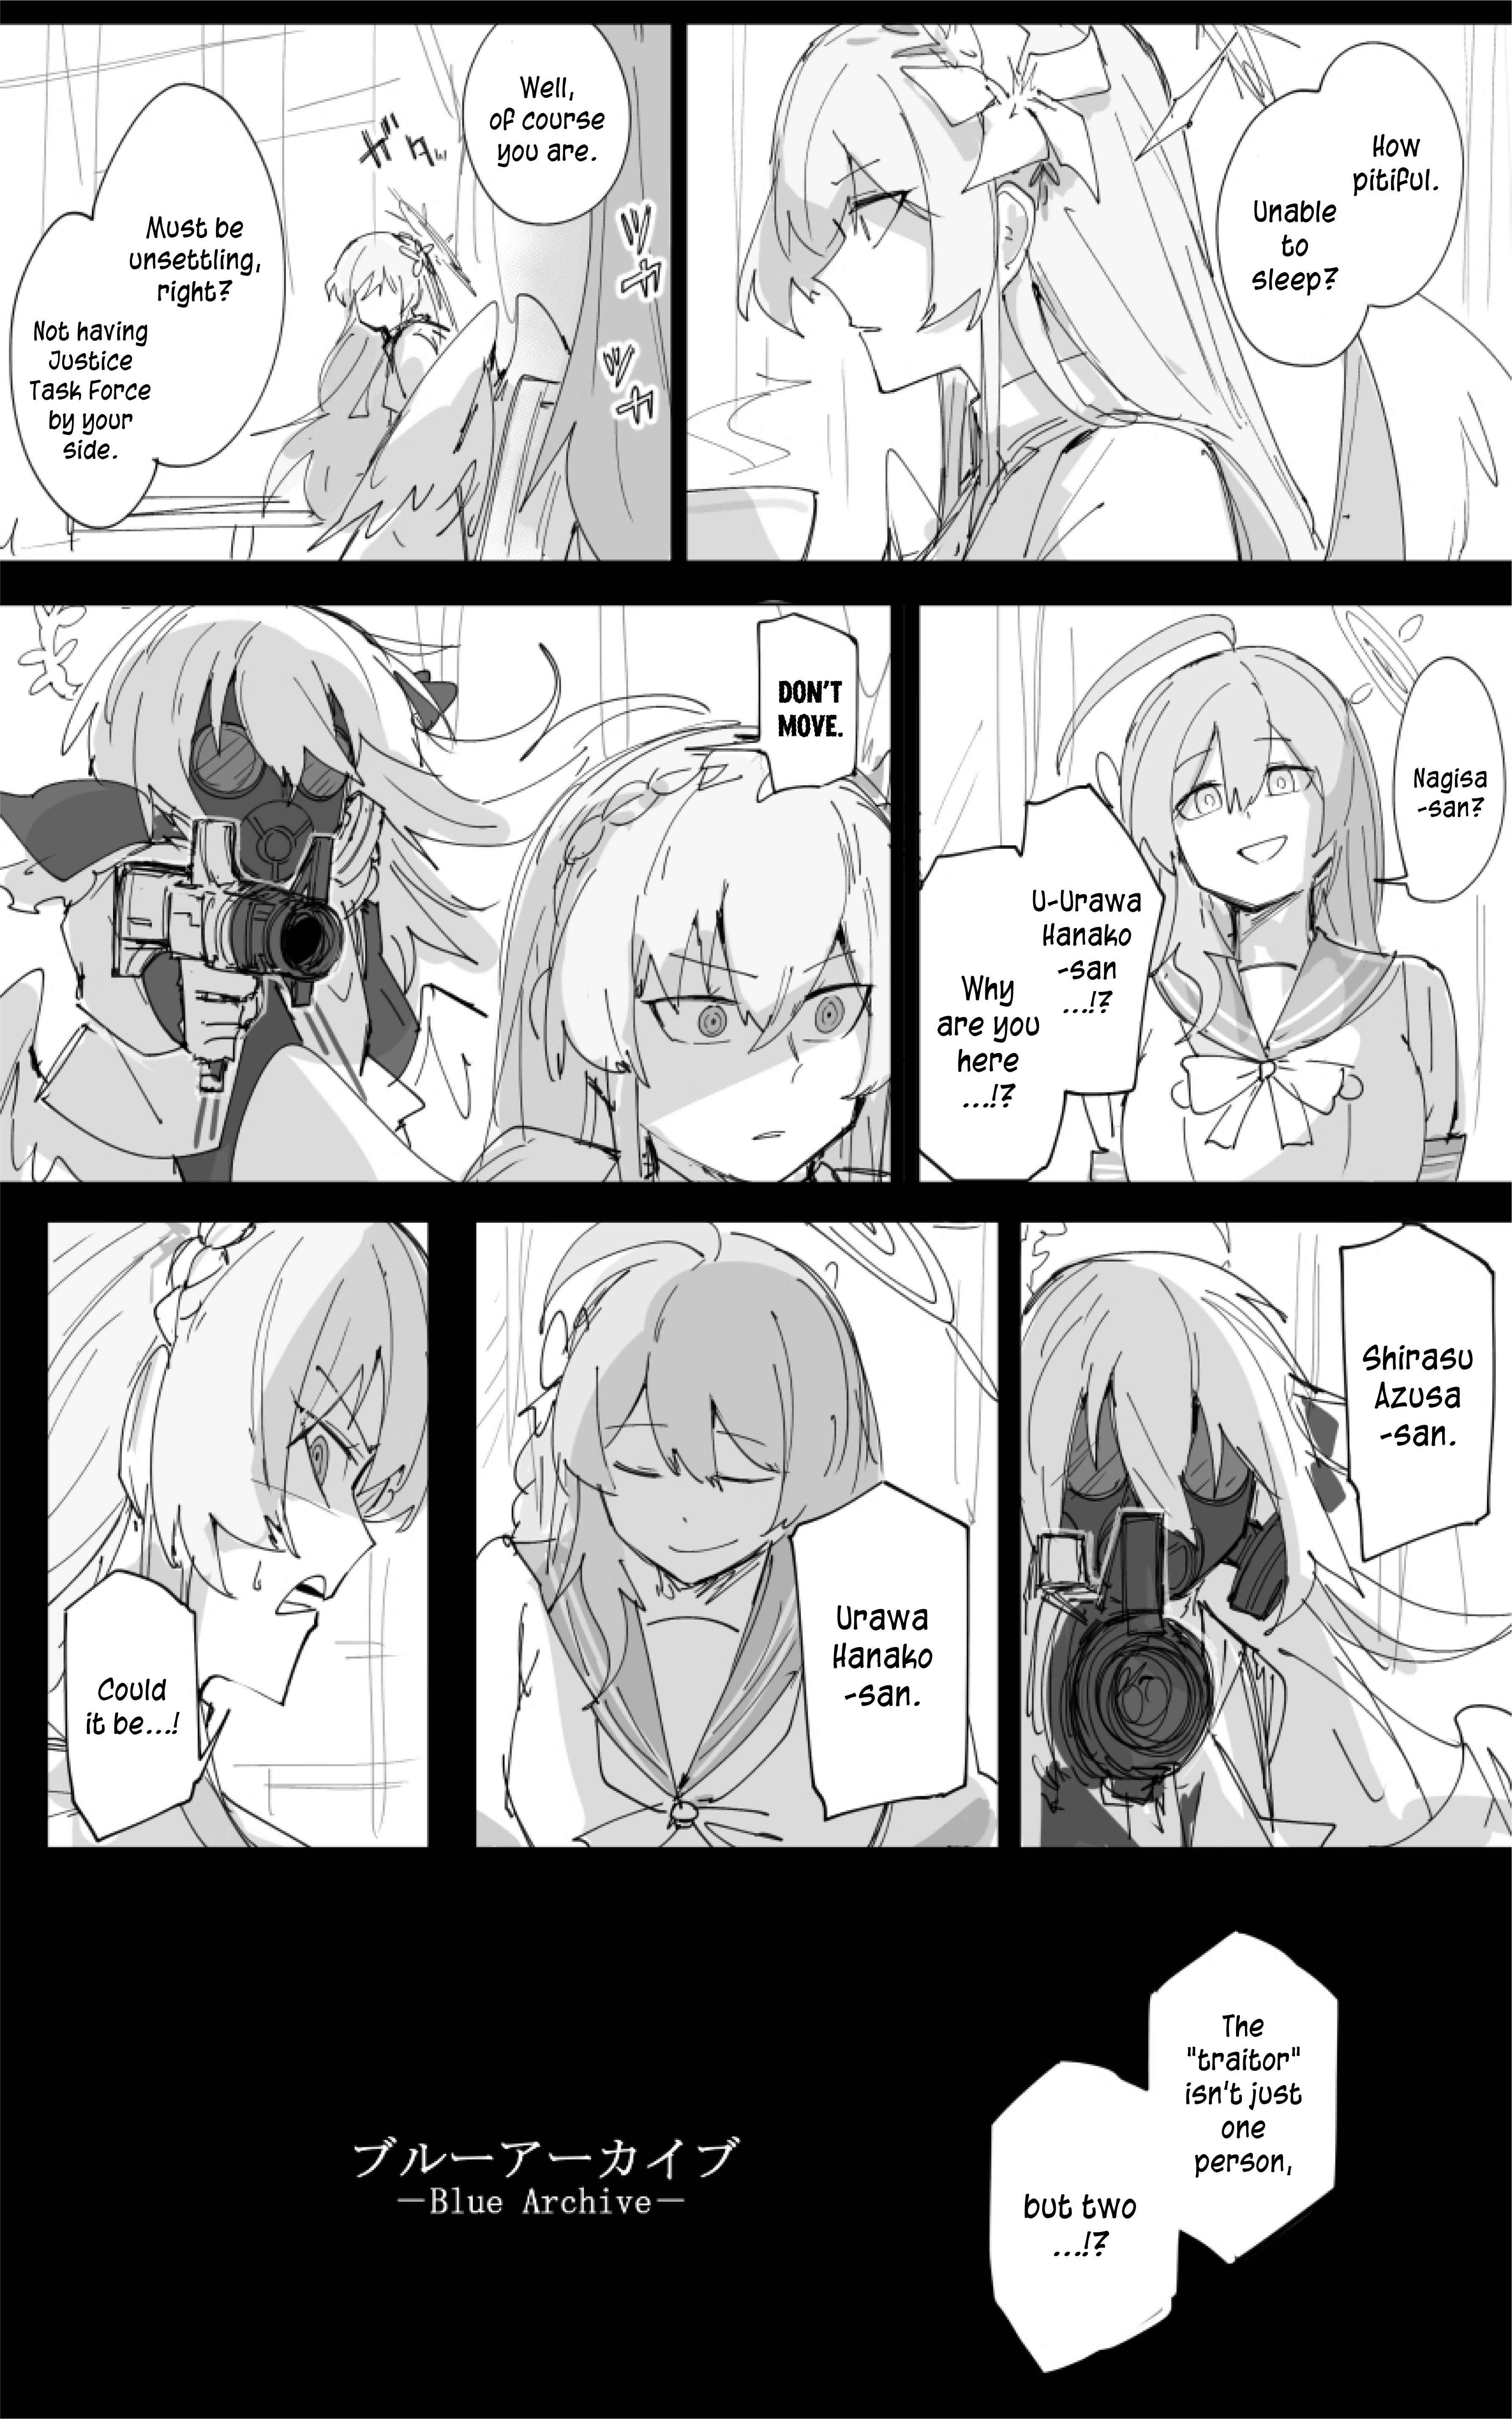 Blue Archive - Kankan's Blue Archive Logs (Doujinshi) Chapter 7 - Picture 1